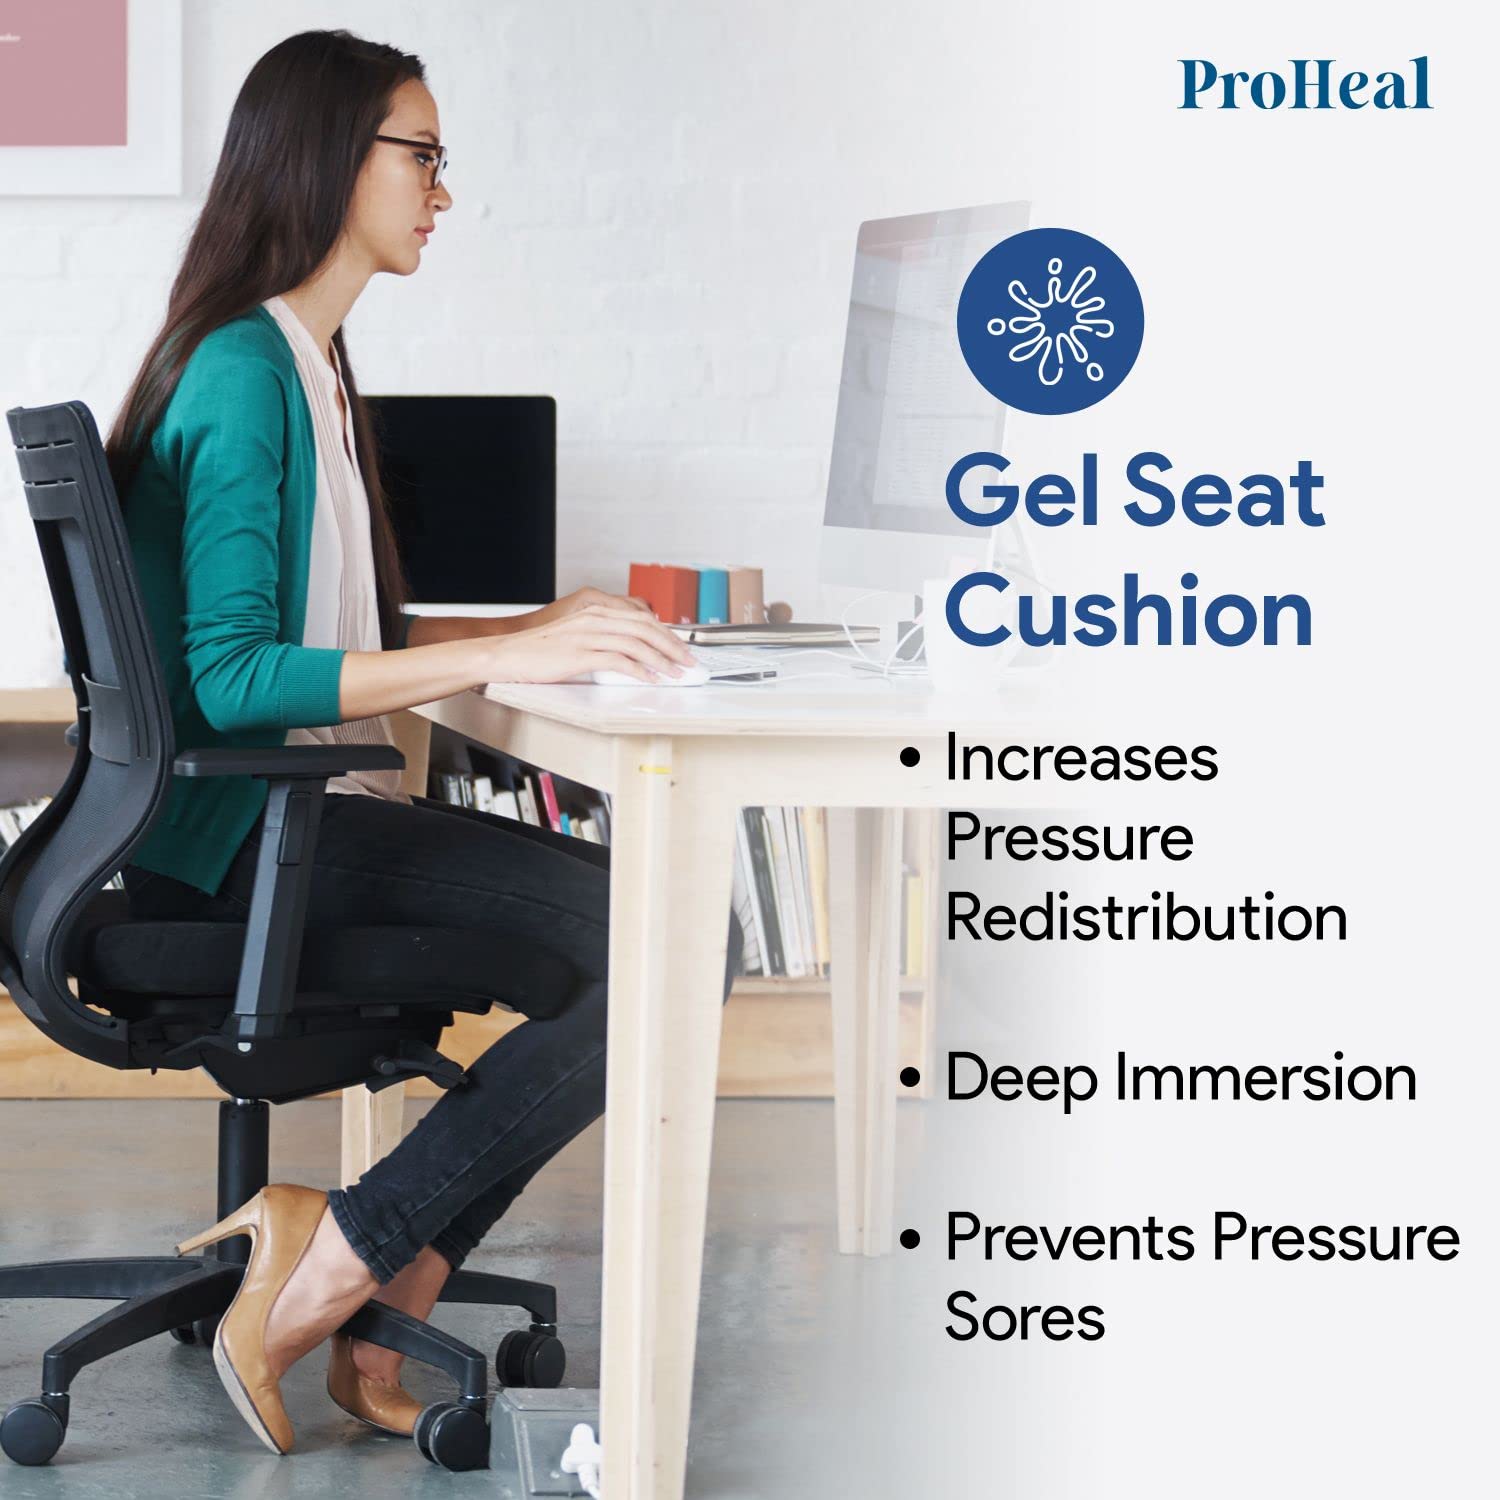 Wheelchair Seat Cushion Gel Infused Foam - Orthopedic, Coccyx, Tailbone Support - High Resilience for Positioning and Stability Prevents Pressure Sores -18" x 16" x 3"  - Like New